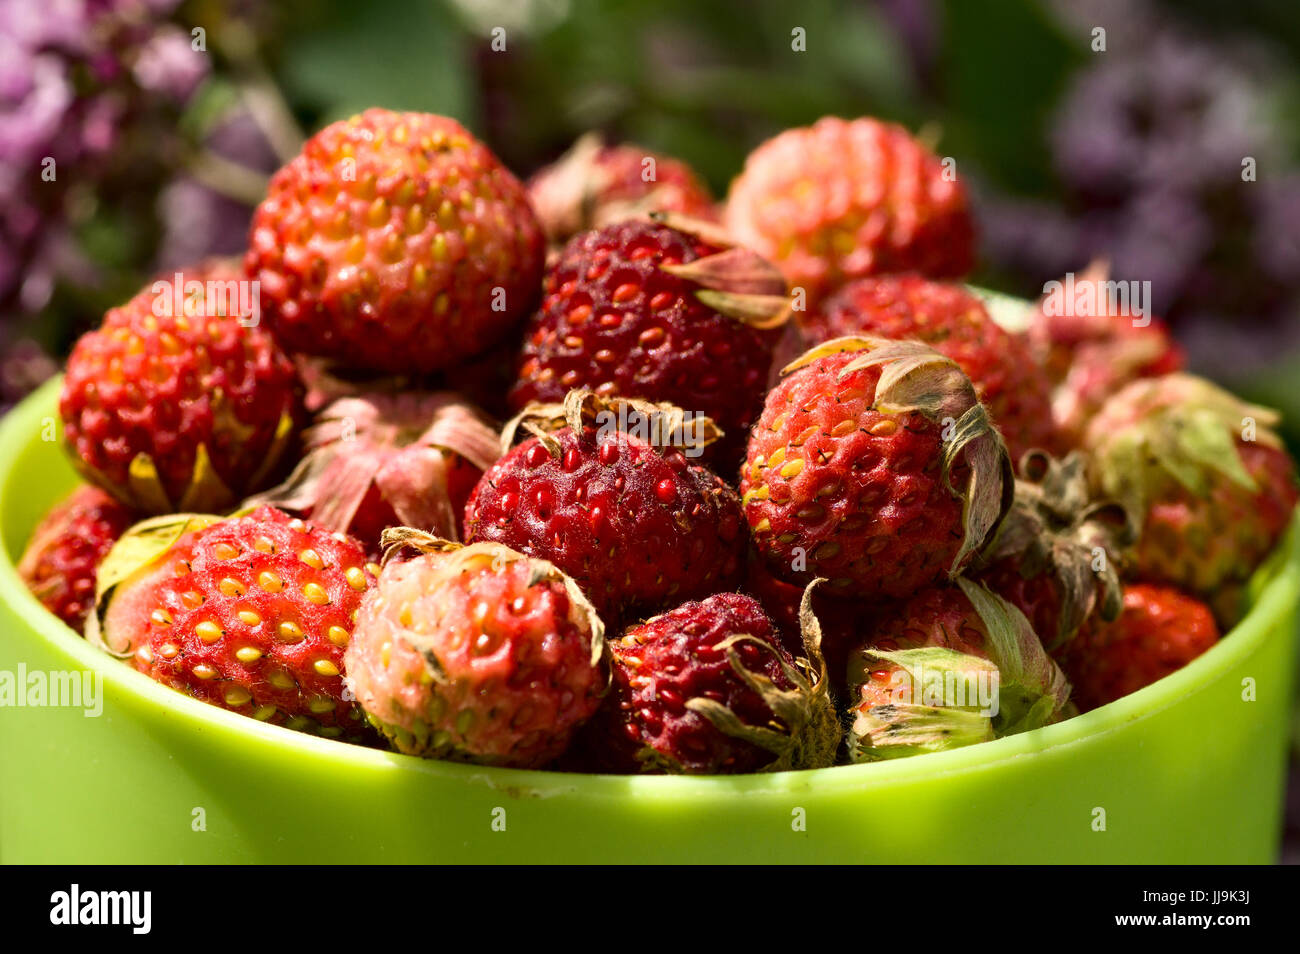 Cup full of wild strawberries Stock Photo